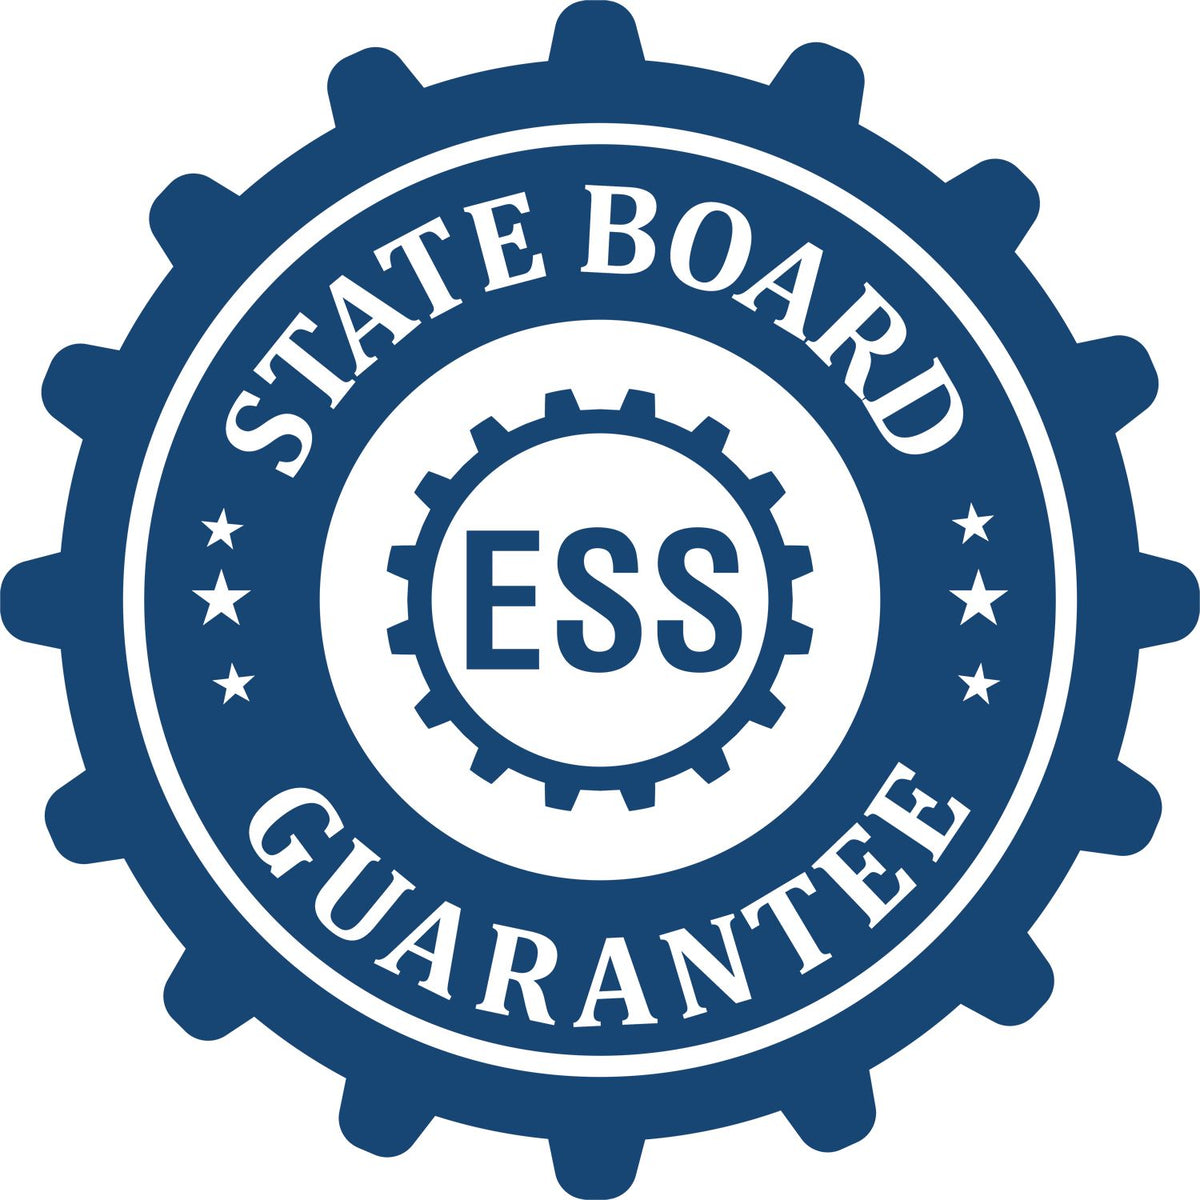 An emblem in a gear shape illustrating a state board guarantee for the Soft Illinois Professional Engineer Seal product.